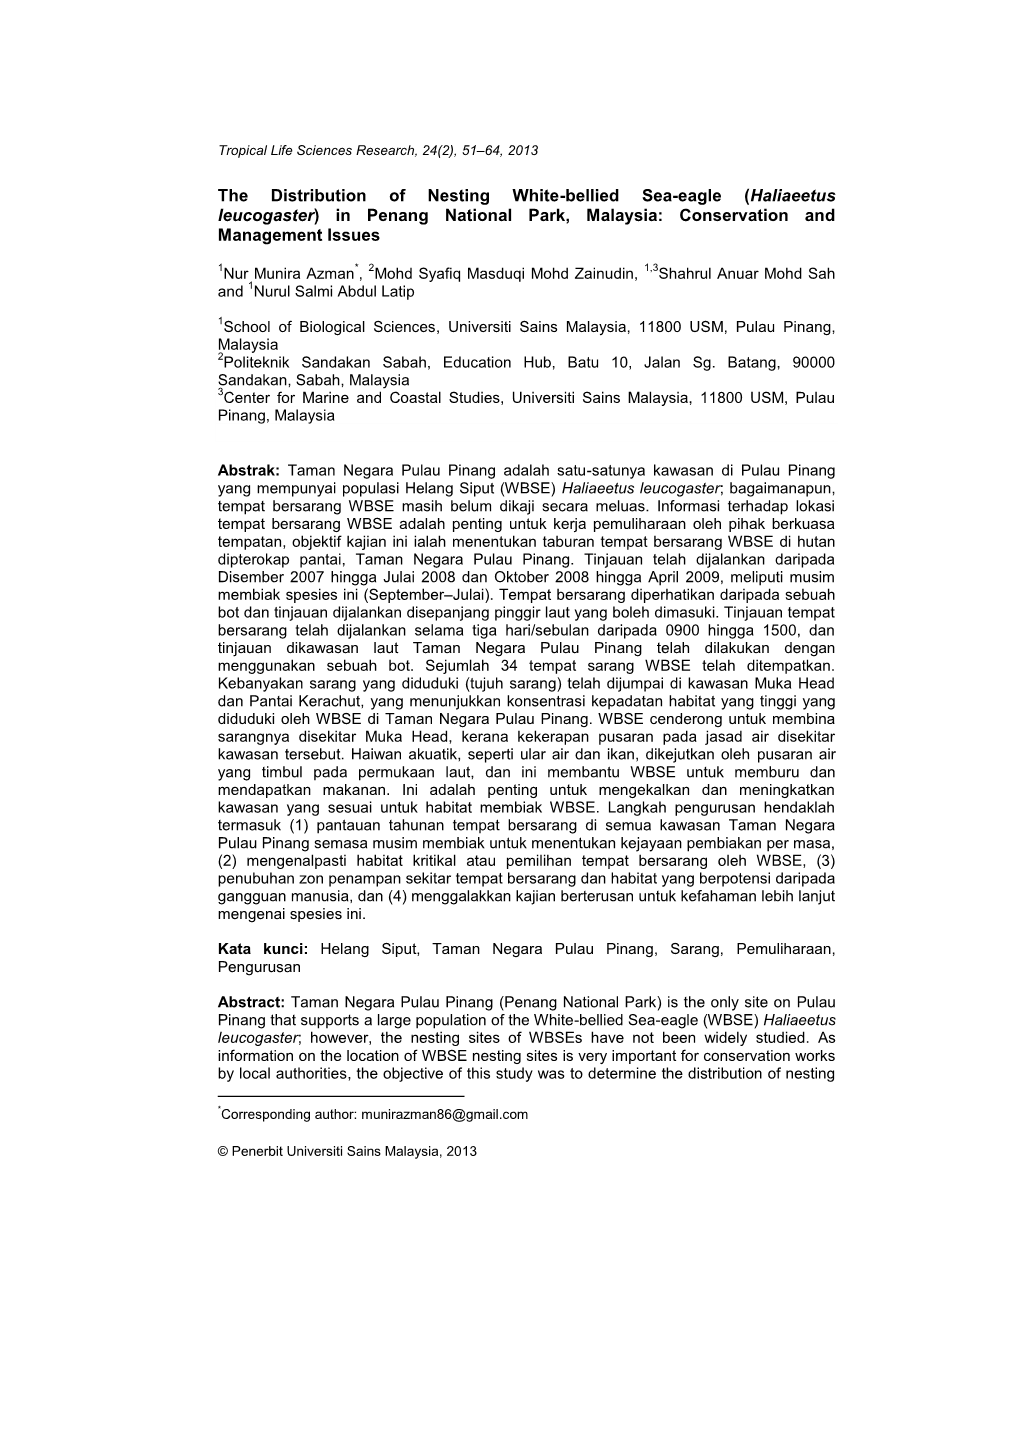 The Distribution of Nesting White-Bellied Sea-Eagle (Haliaeetus Leucogaster) in Penang National Park, Malaysia: Conservation and Management Issues